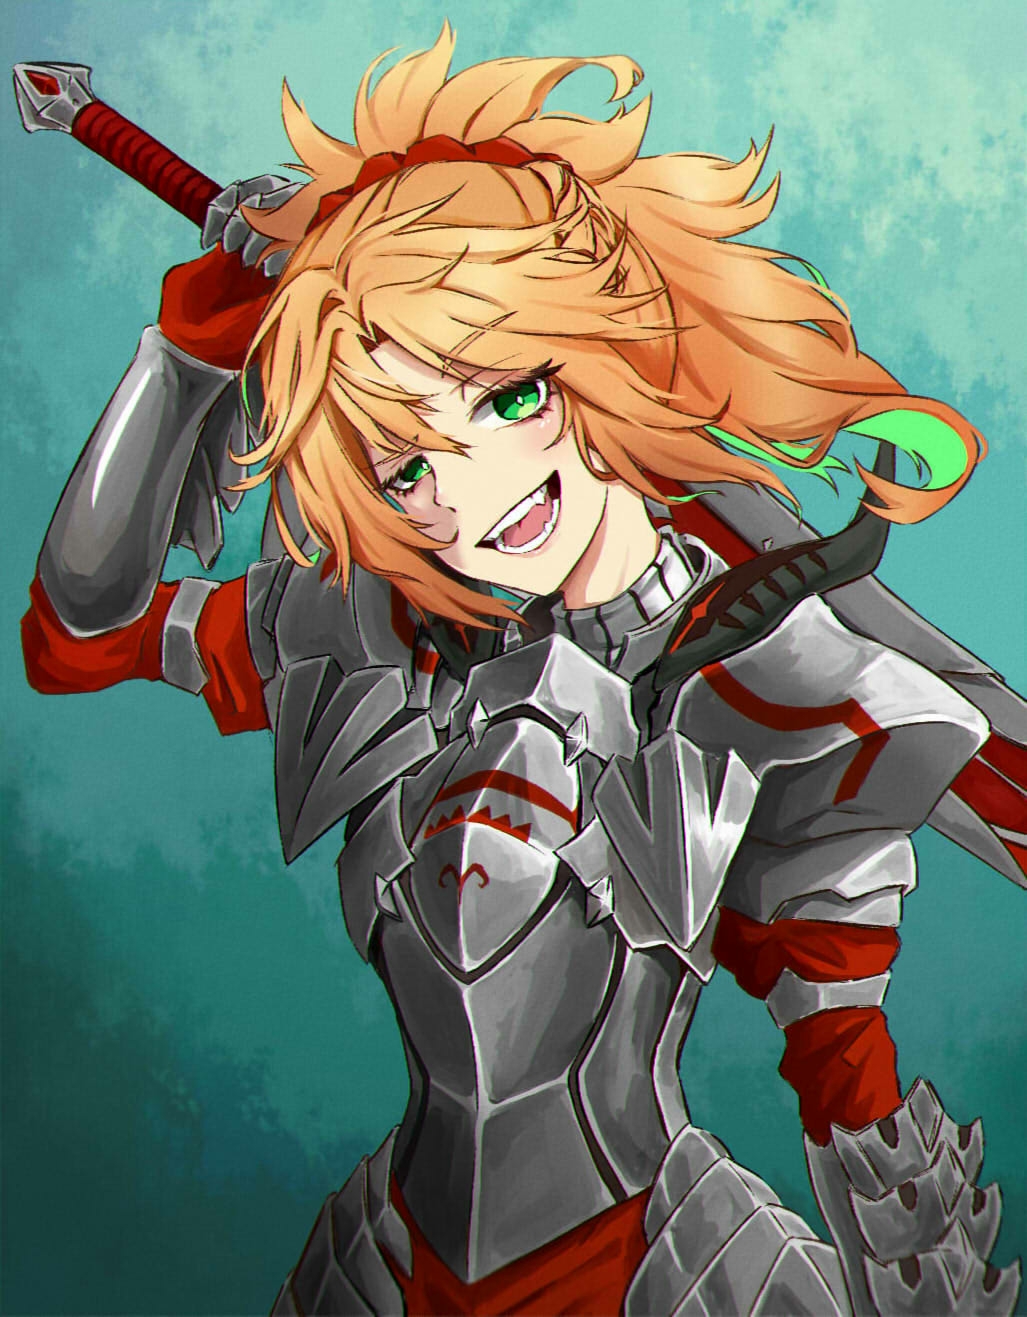 Fate Series FGO Fate Apocrypha Long Hair Messy Hair Ponytail Female Warrior Armor Women With Swords  1027x1317